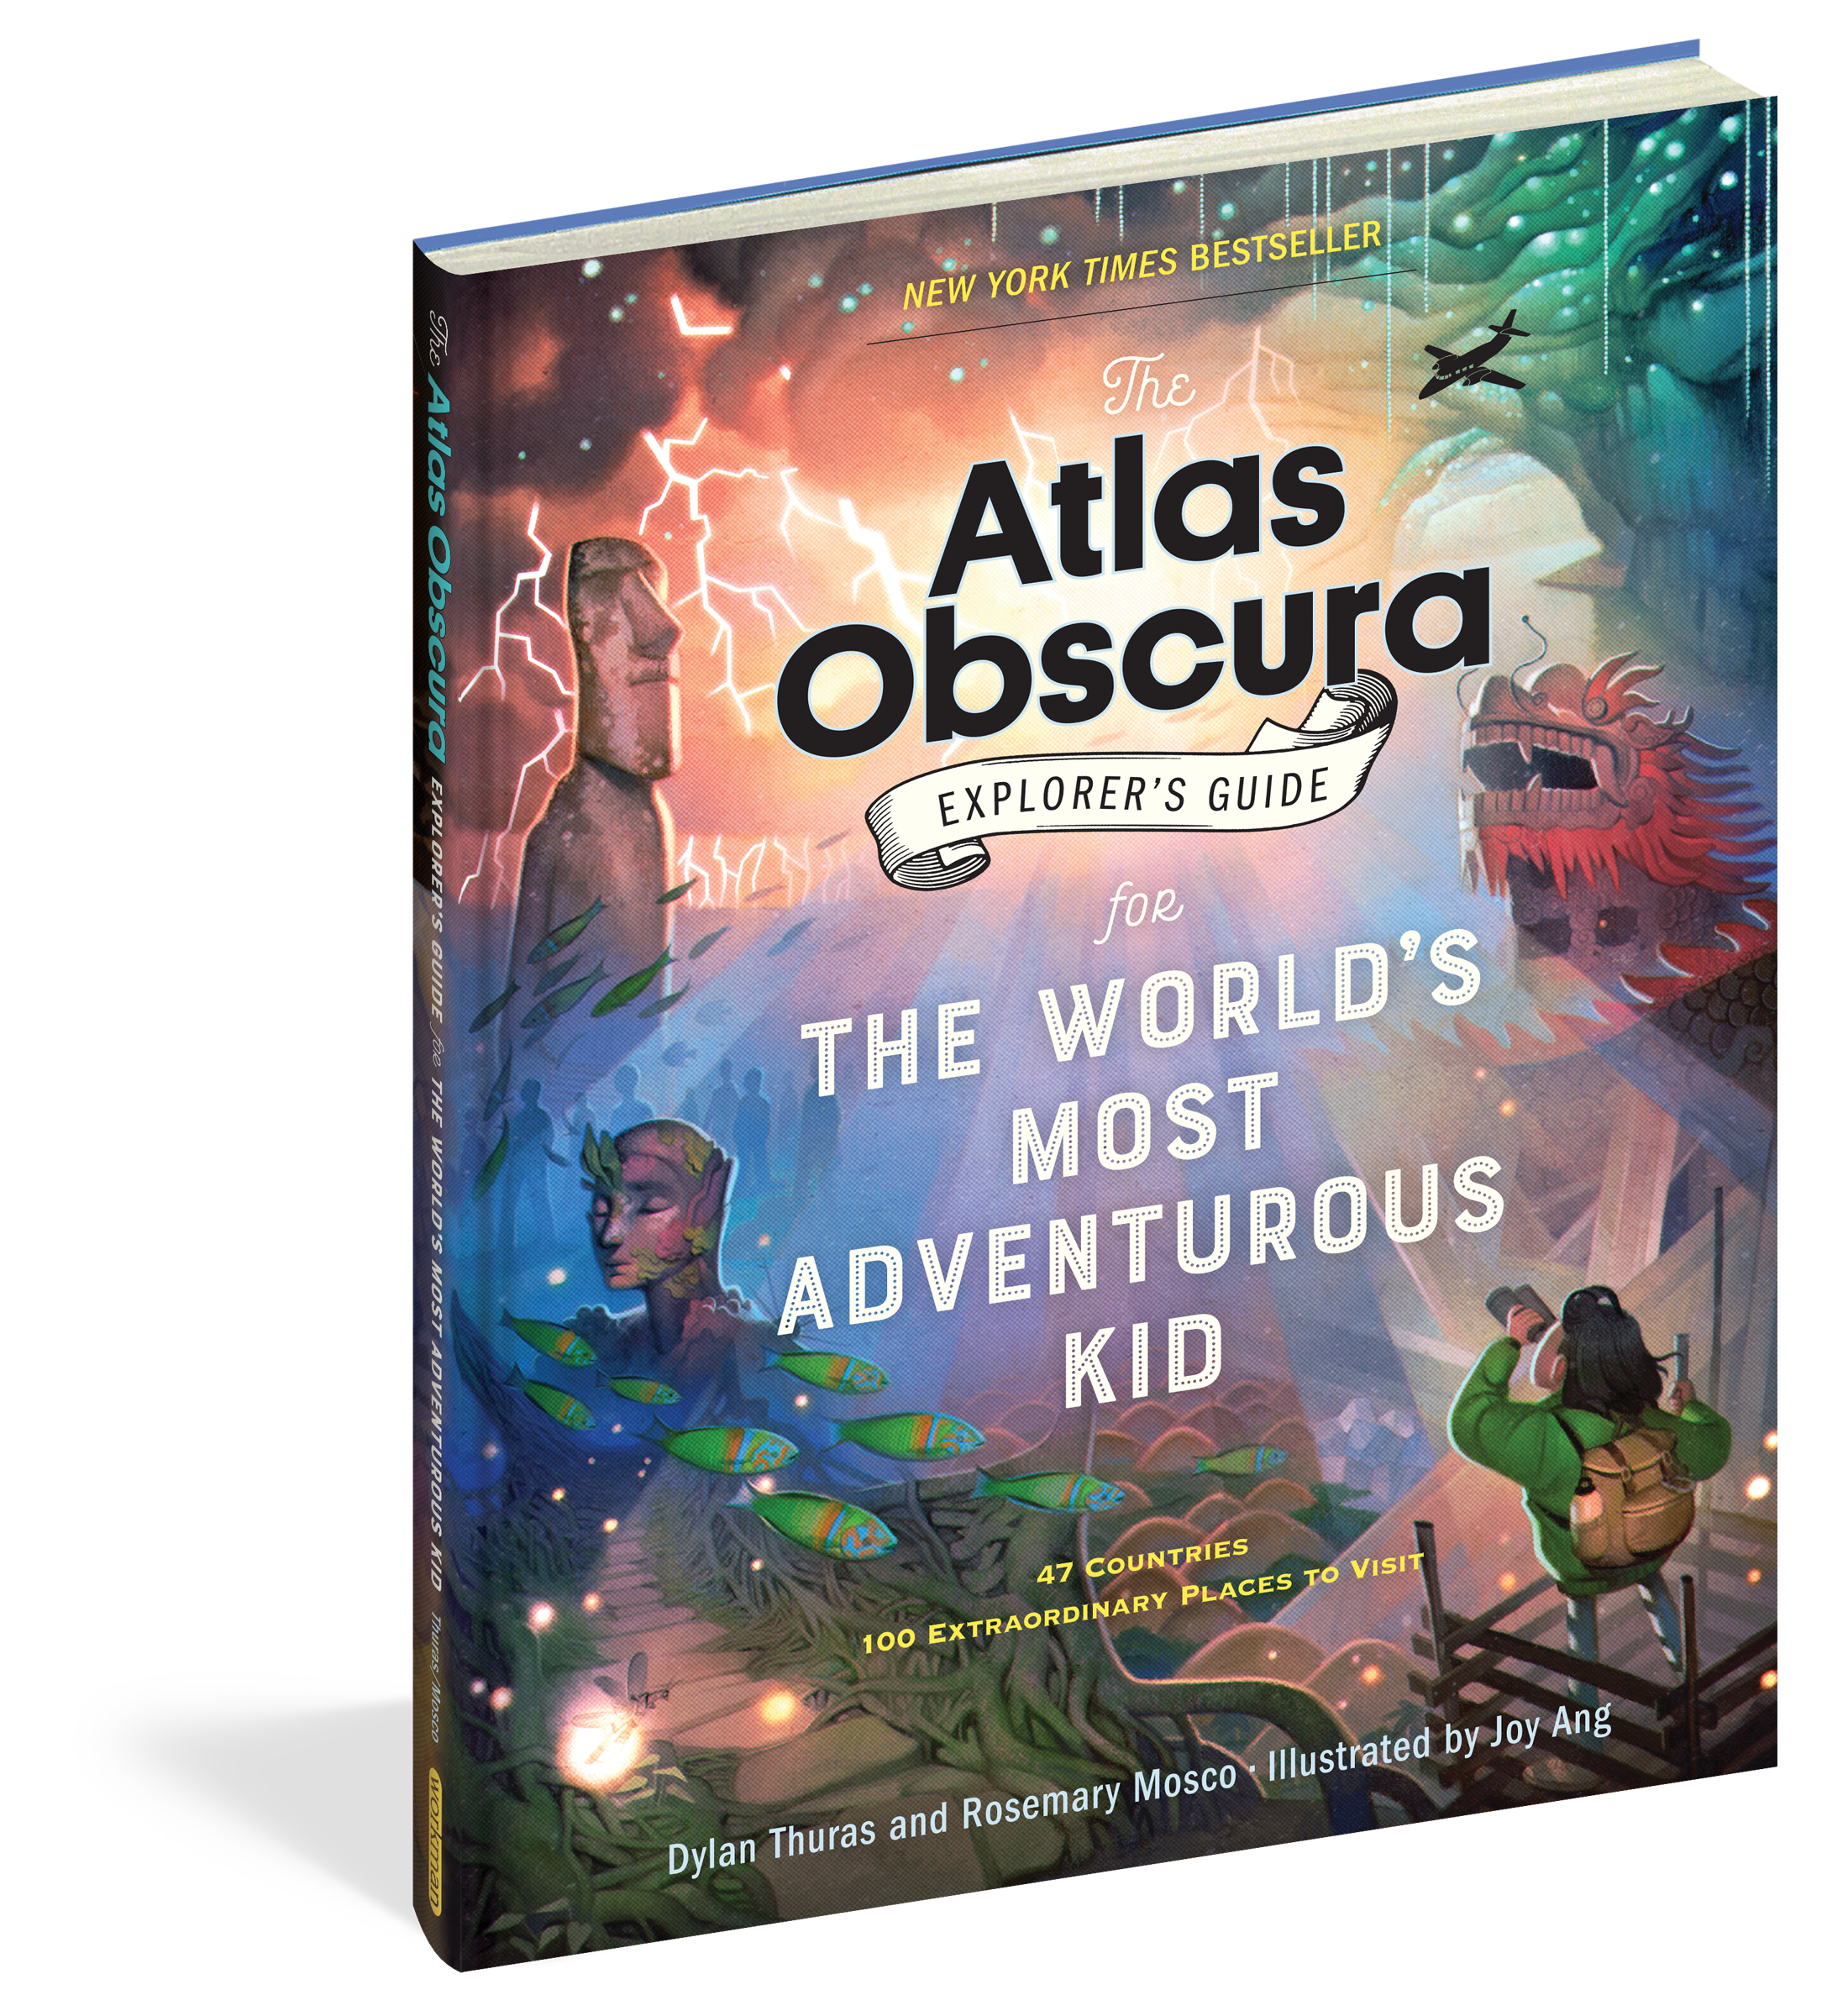 The Atlas Obscura Explorers Guide for The Worlds Most Adventurous Kid    